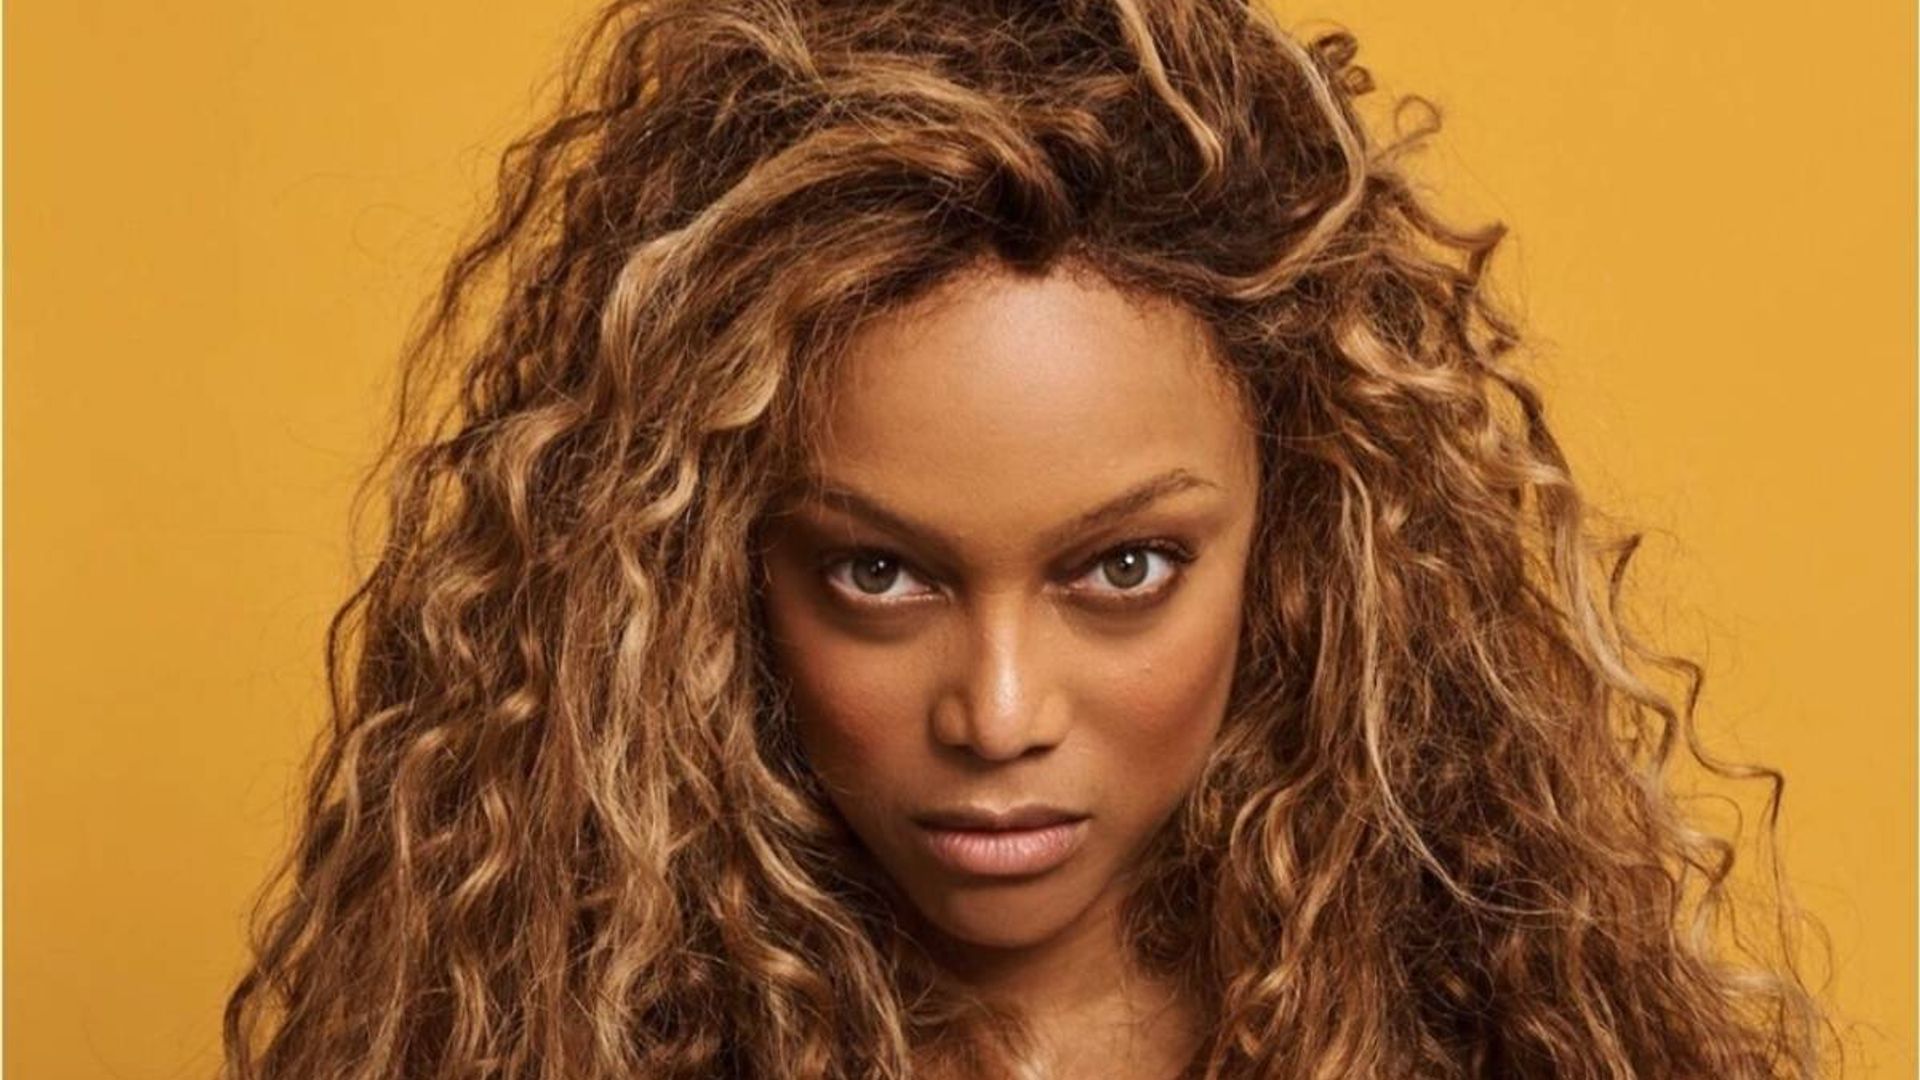 Tyra Banks makes candid body confession with photo - and fans react